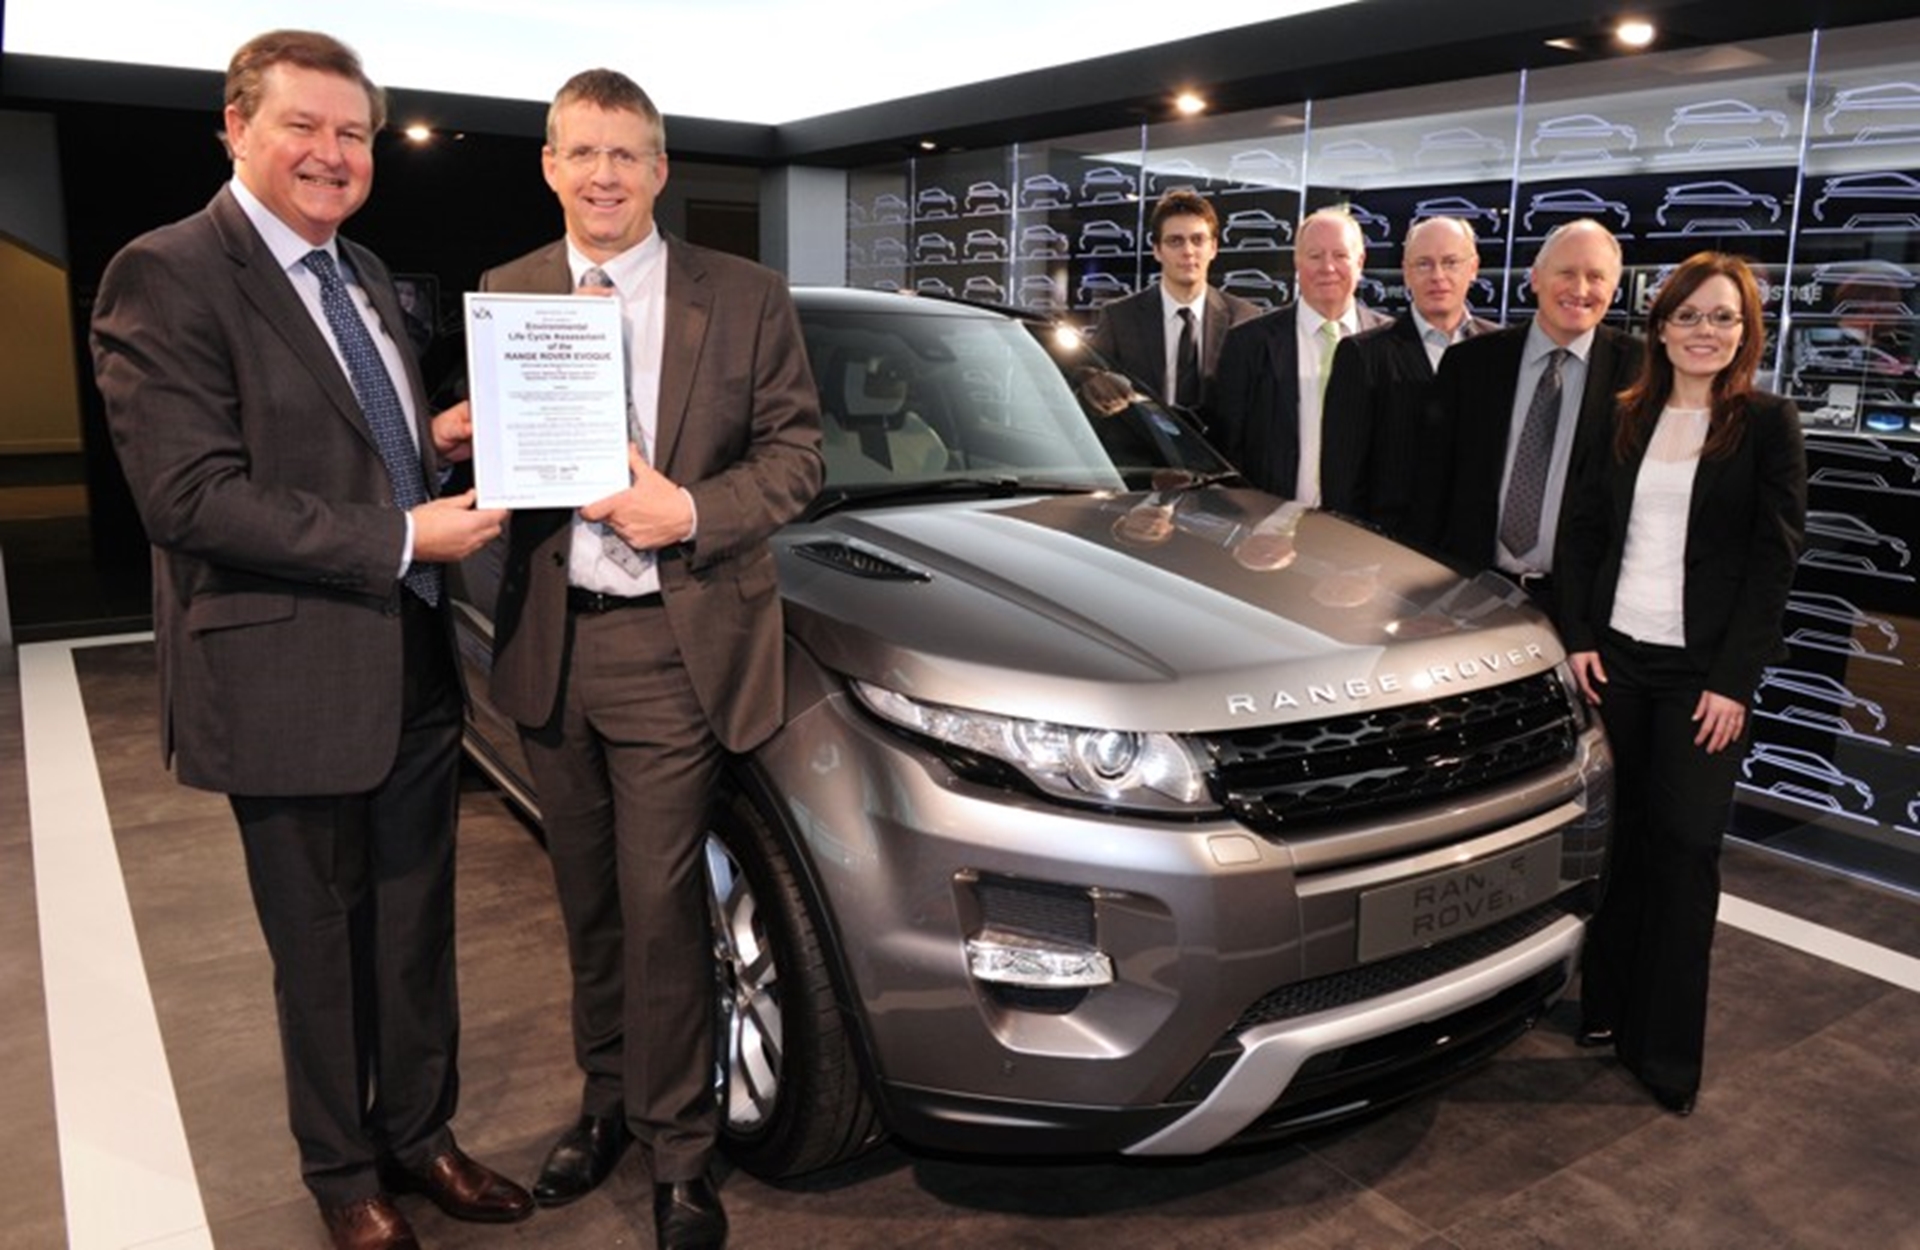 LAND ROVER ACHIEVES ENVIRONMENTAL CERTIFICATION FOR RANGE ROVER EVOQUE